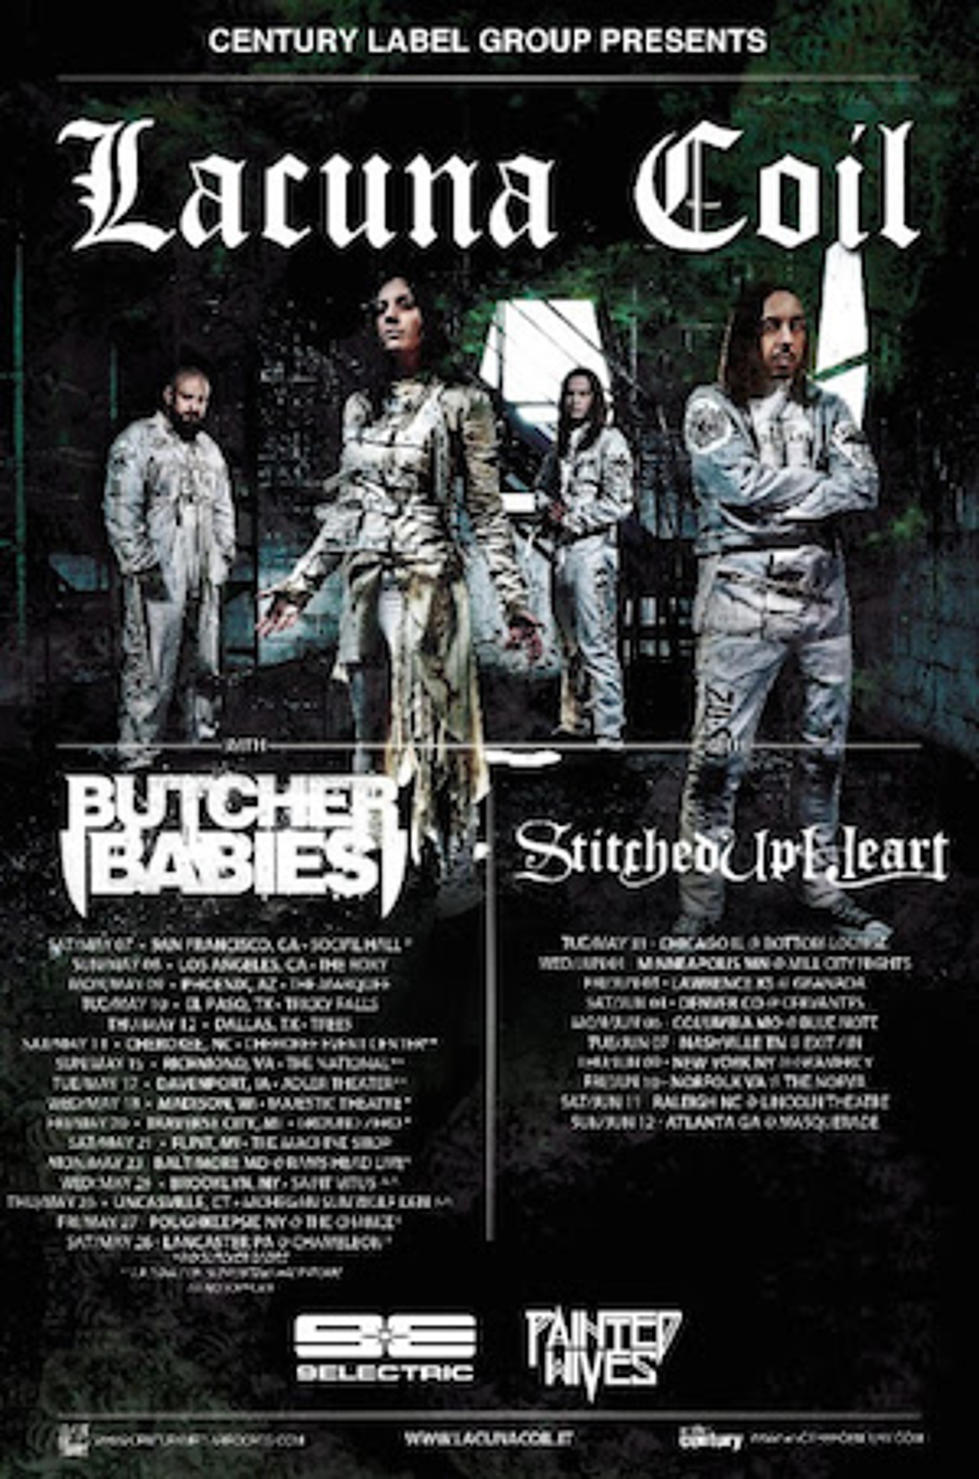 Lacuna Coil Reveal Second Leg of 2016 North American Tour Dates